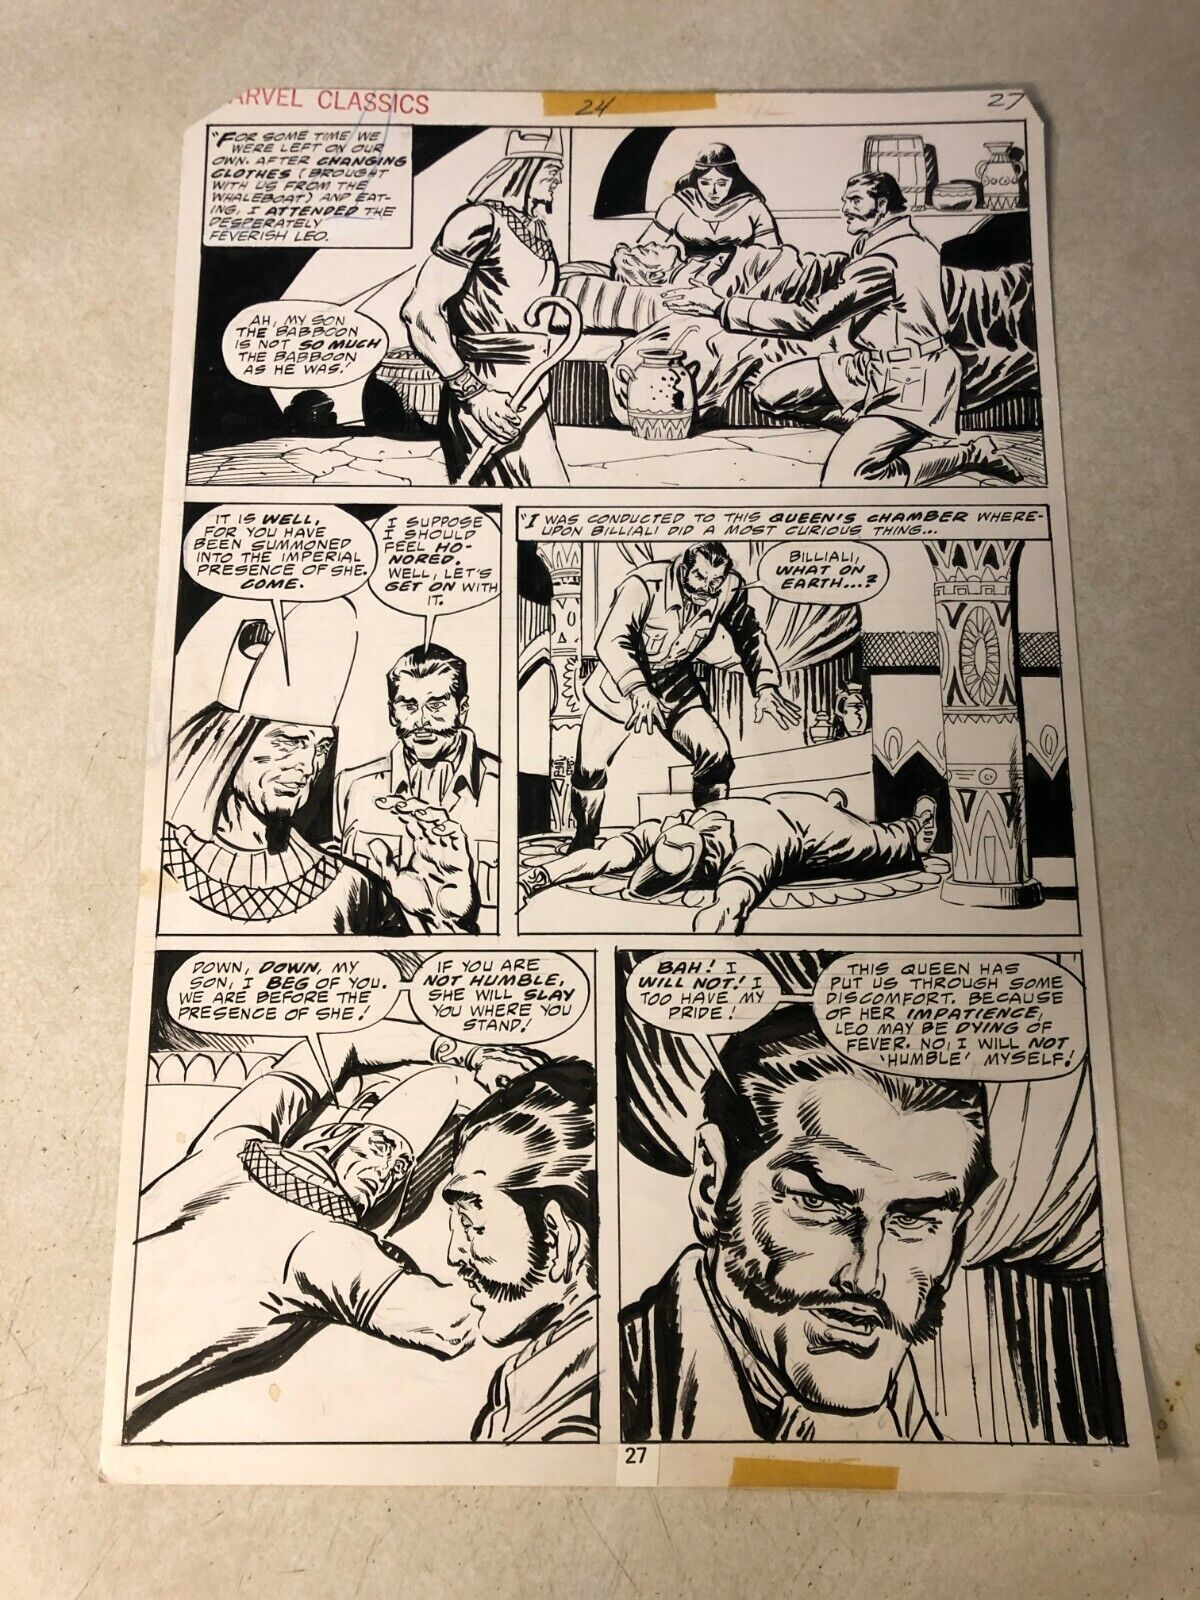 SHE original art MARVEL CLASSICS #24 LEO DYING bow before the queen 1977 HAGGARD